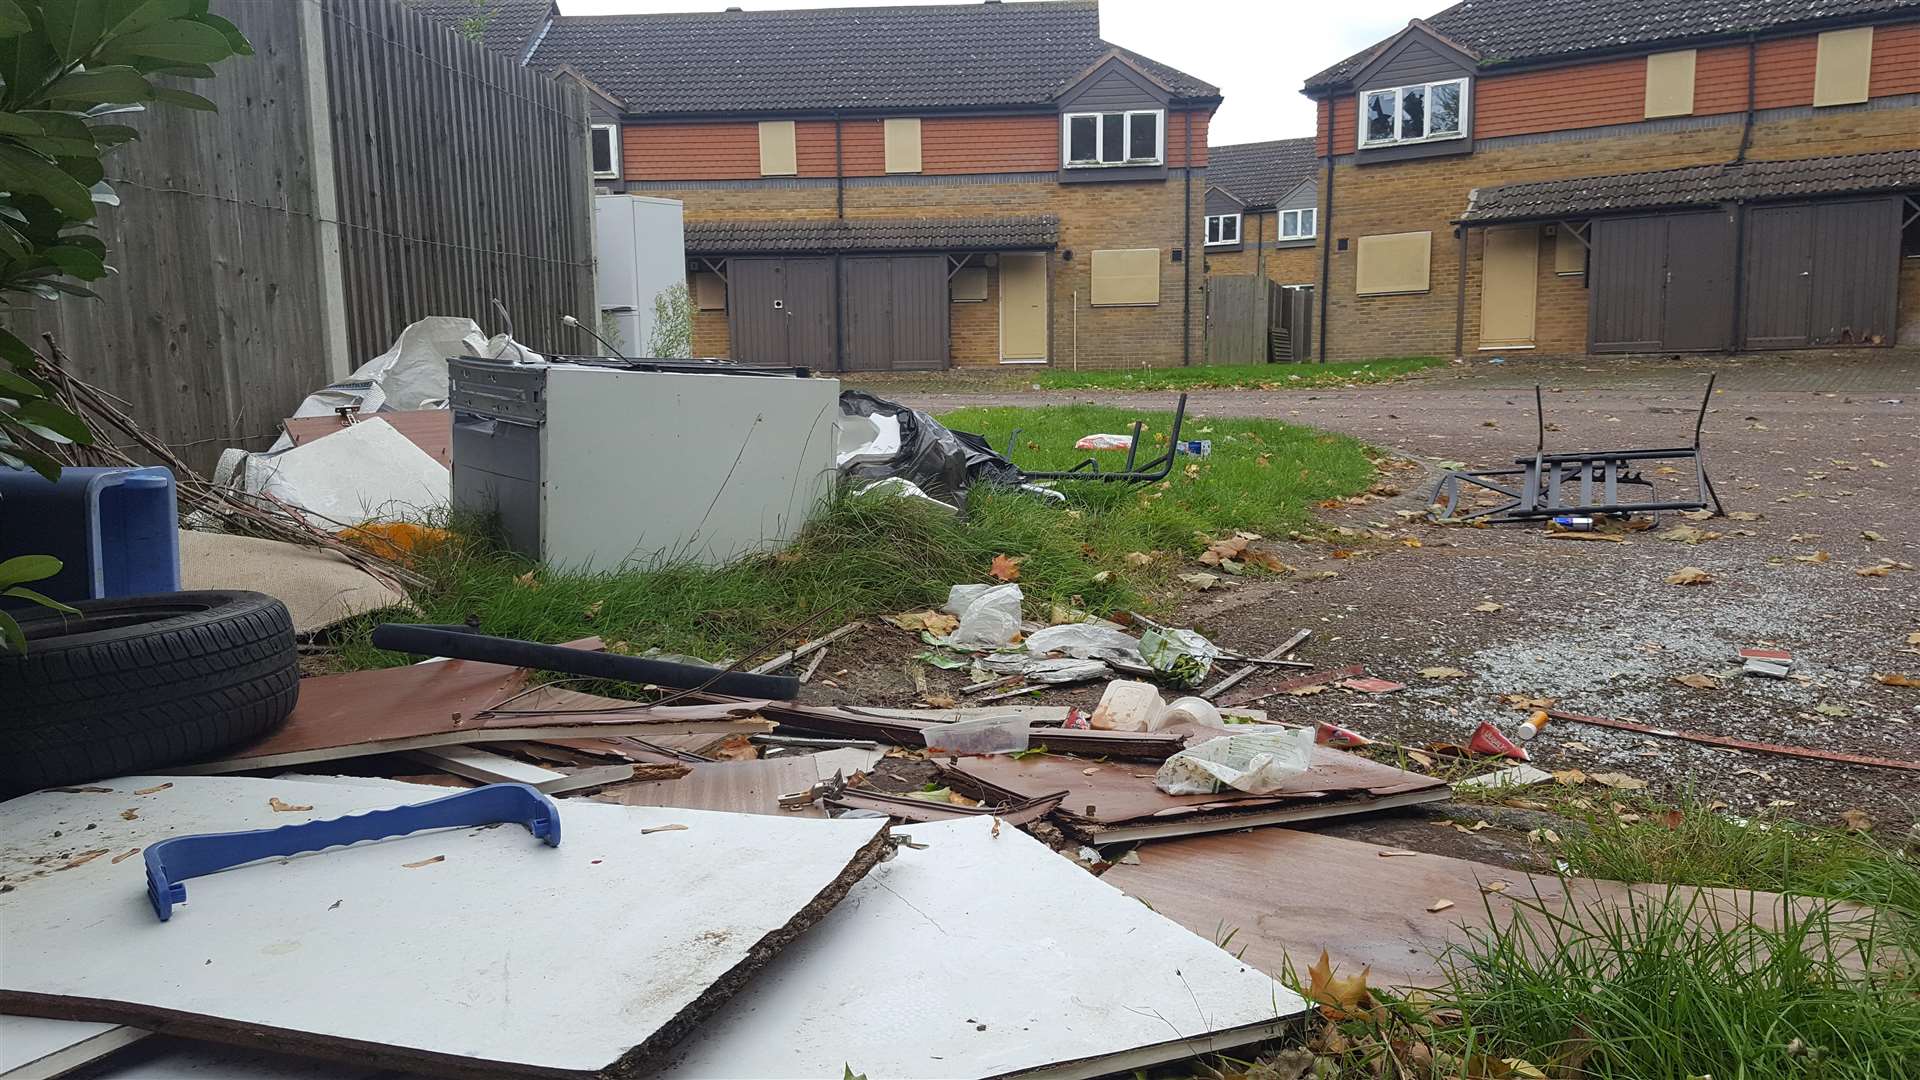 The street had become a target for flytippers (4571949)